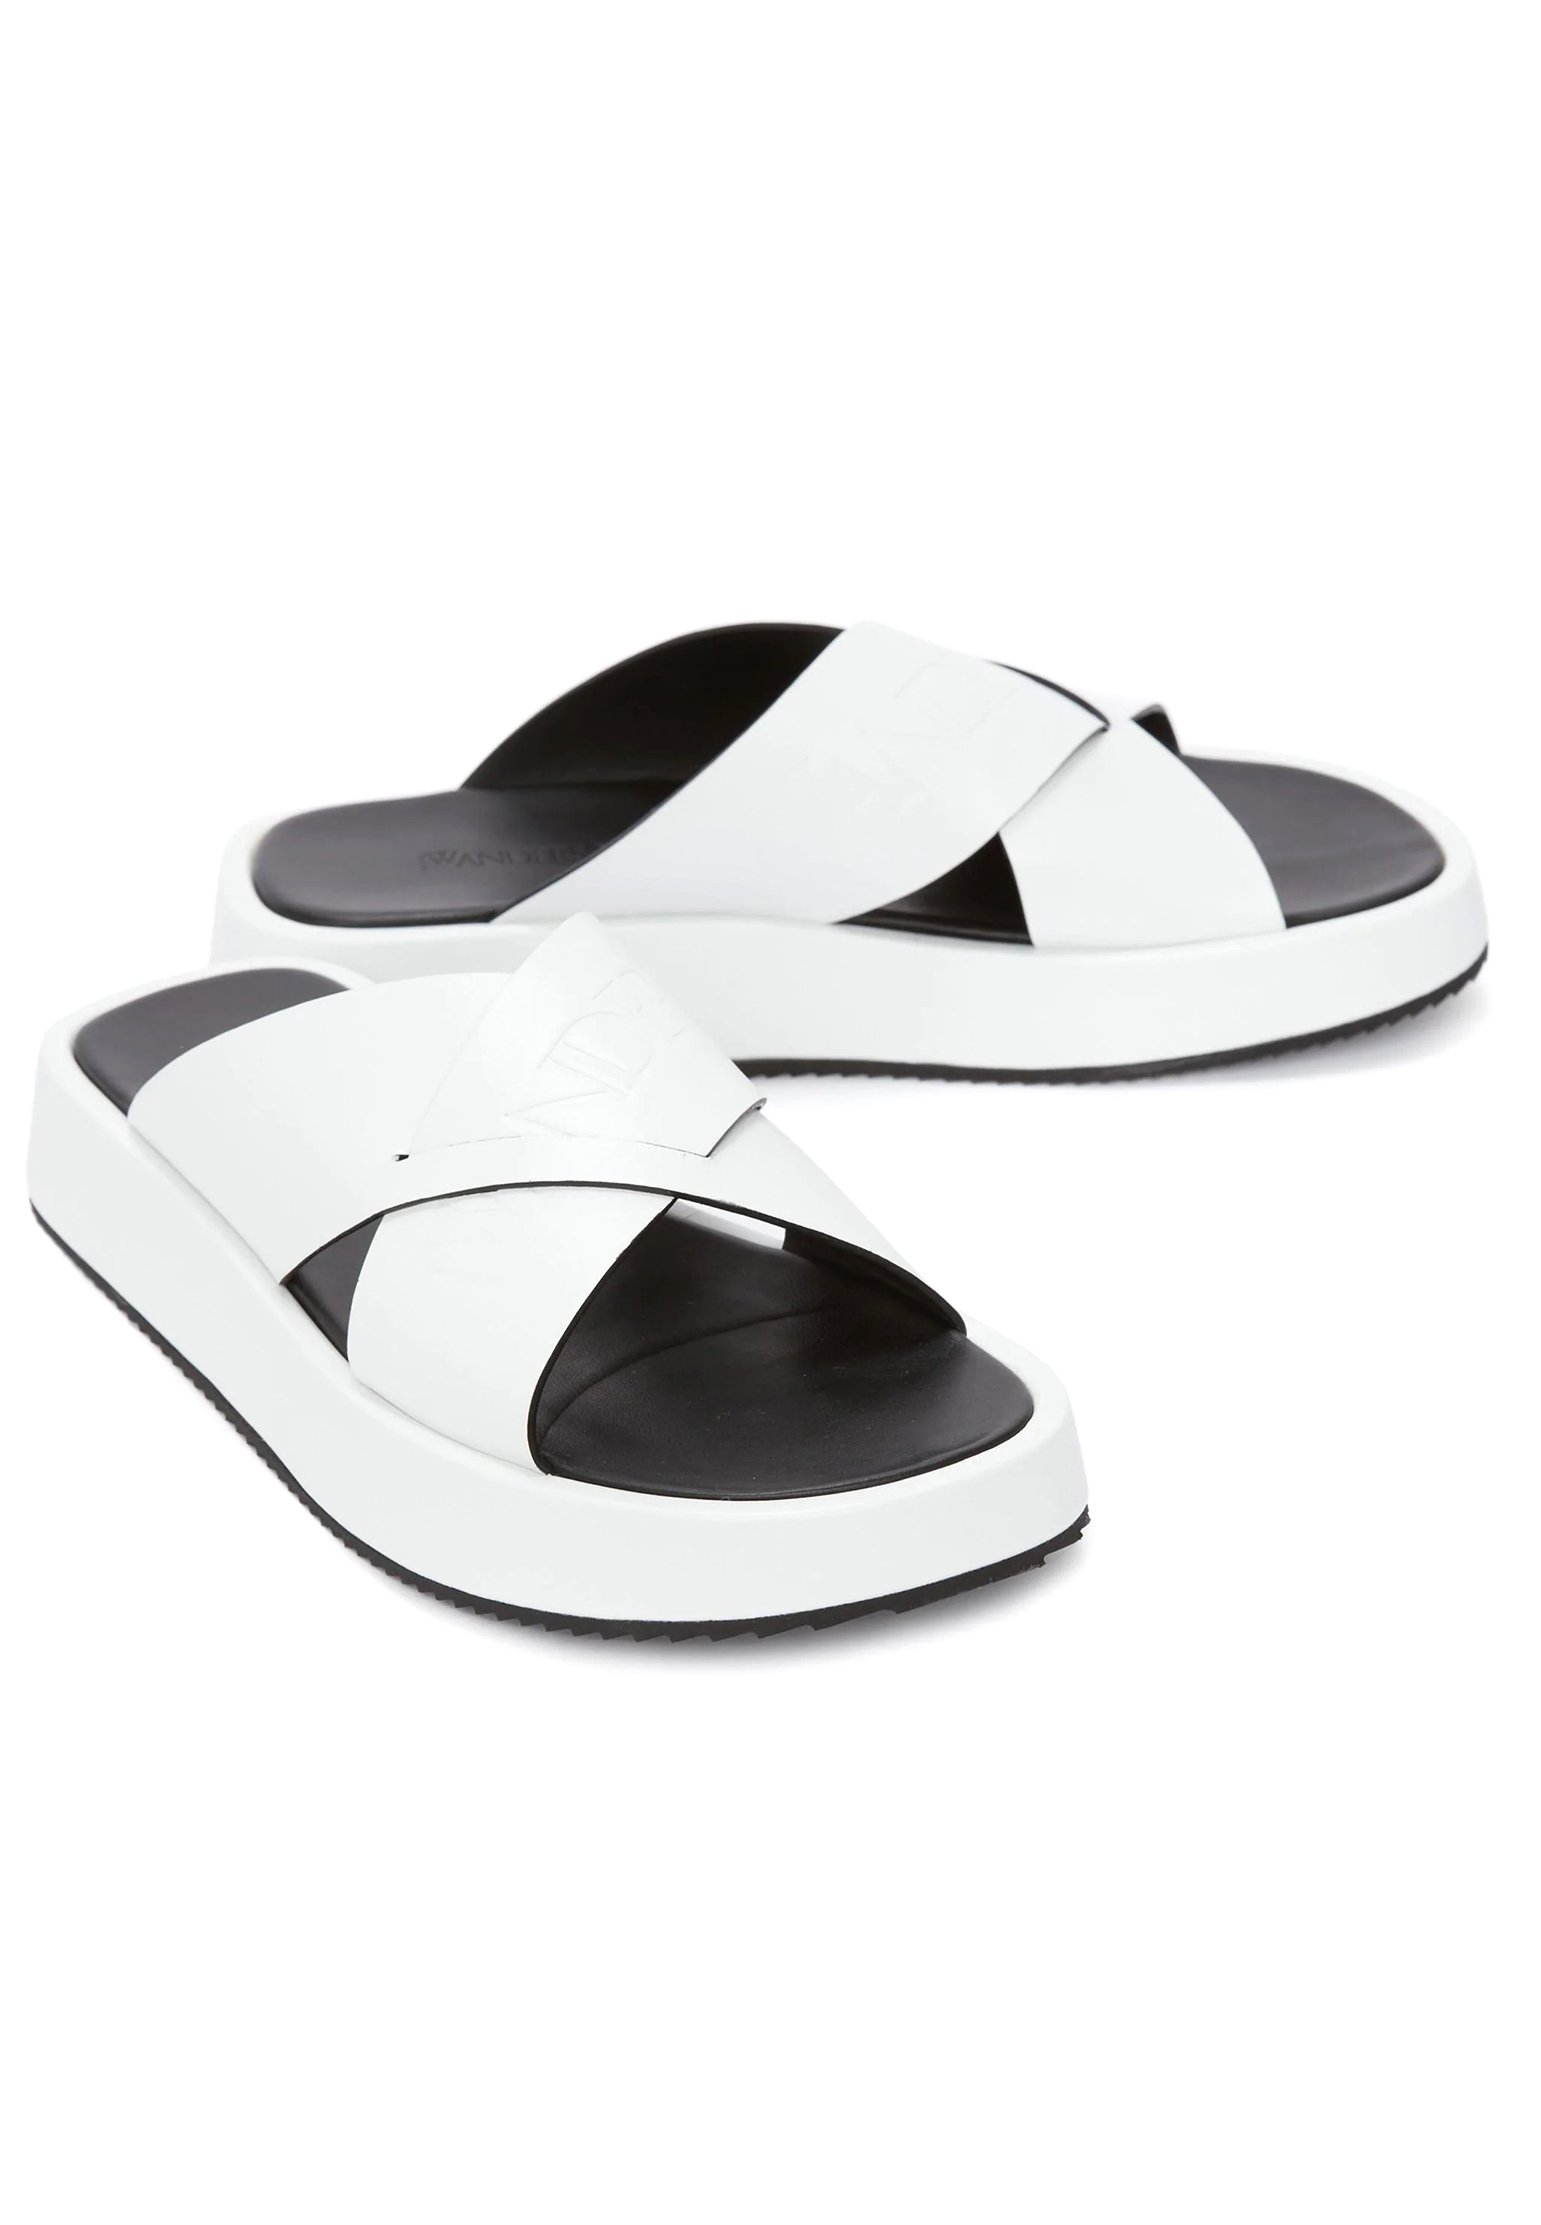 Slides J.W. ANDERSON Color: white (Code: 739) in online store Allure